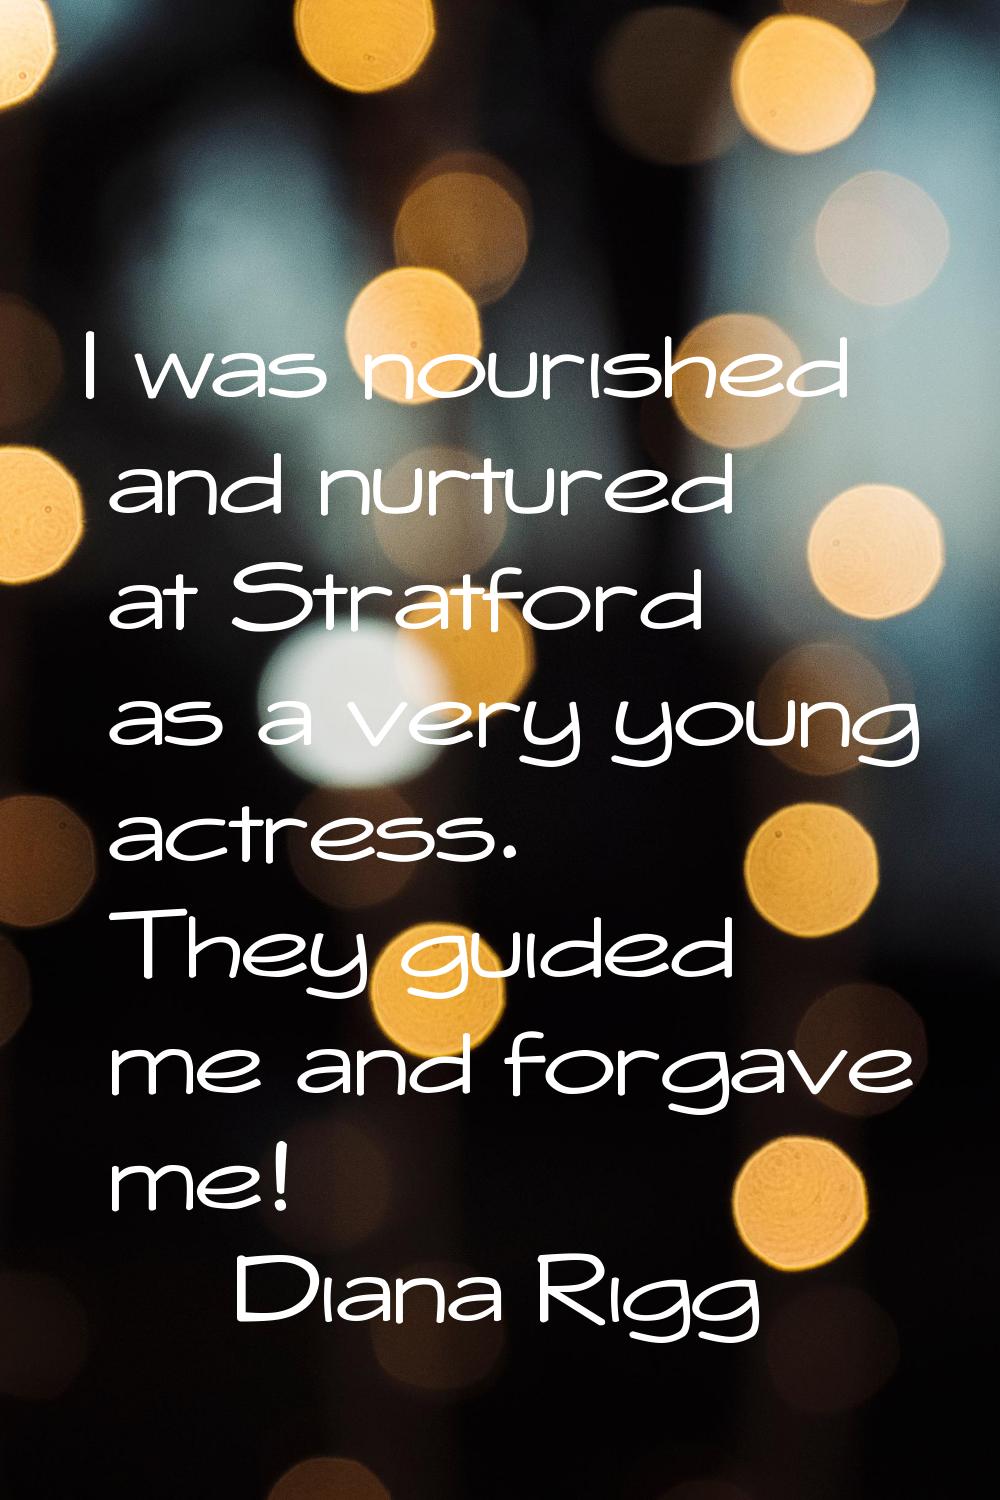 I was nourished and nurtured at Stratford as a very young actress. They guided me and forgave me!